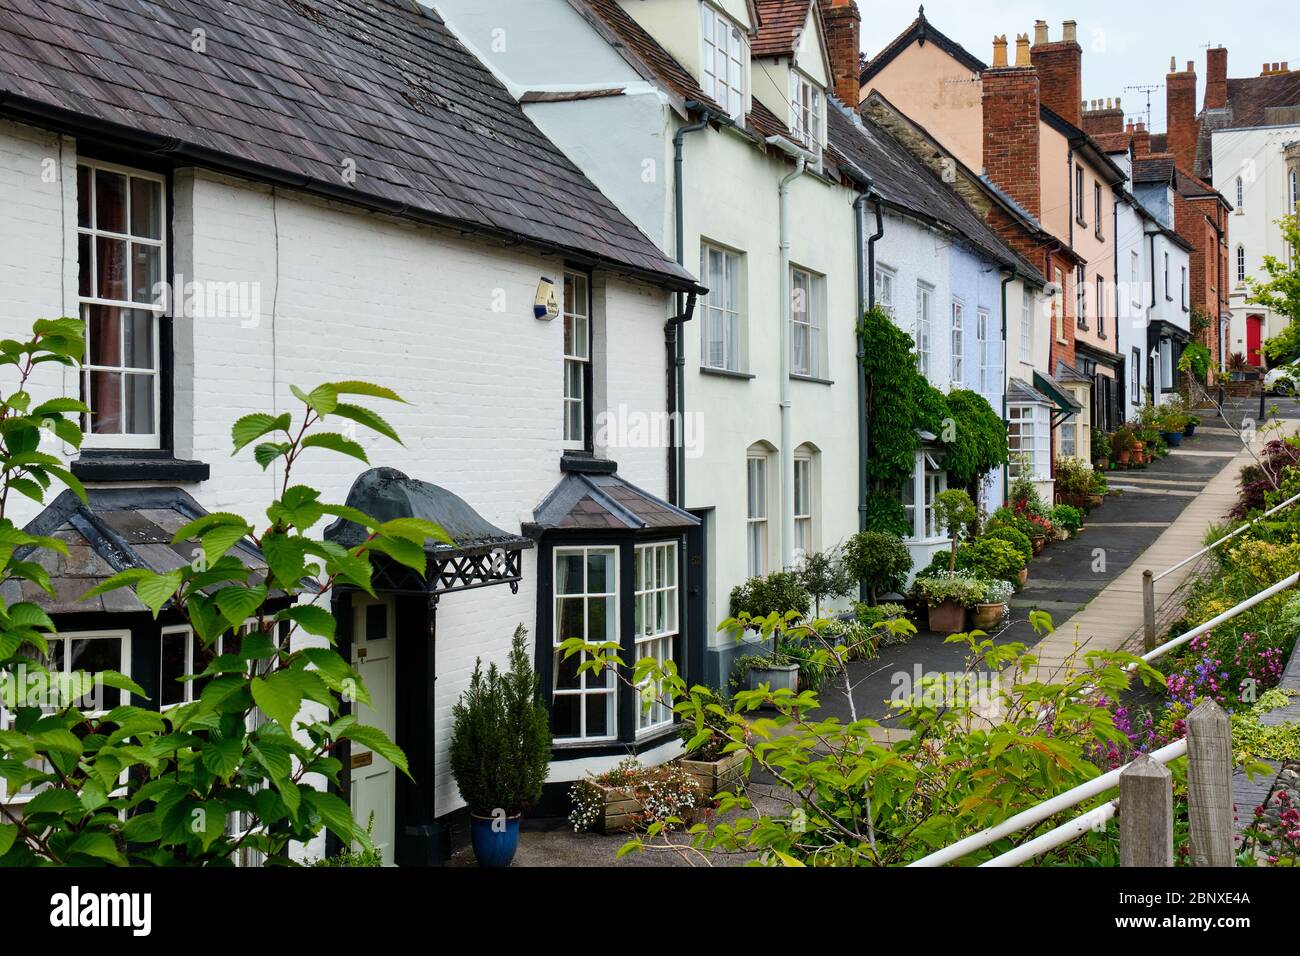 Cottages in Lower Broad Street, Ludlow, Shropshire Stock Photo